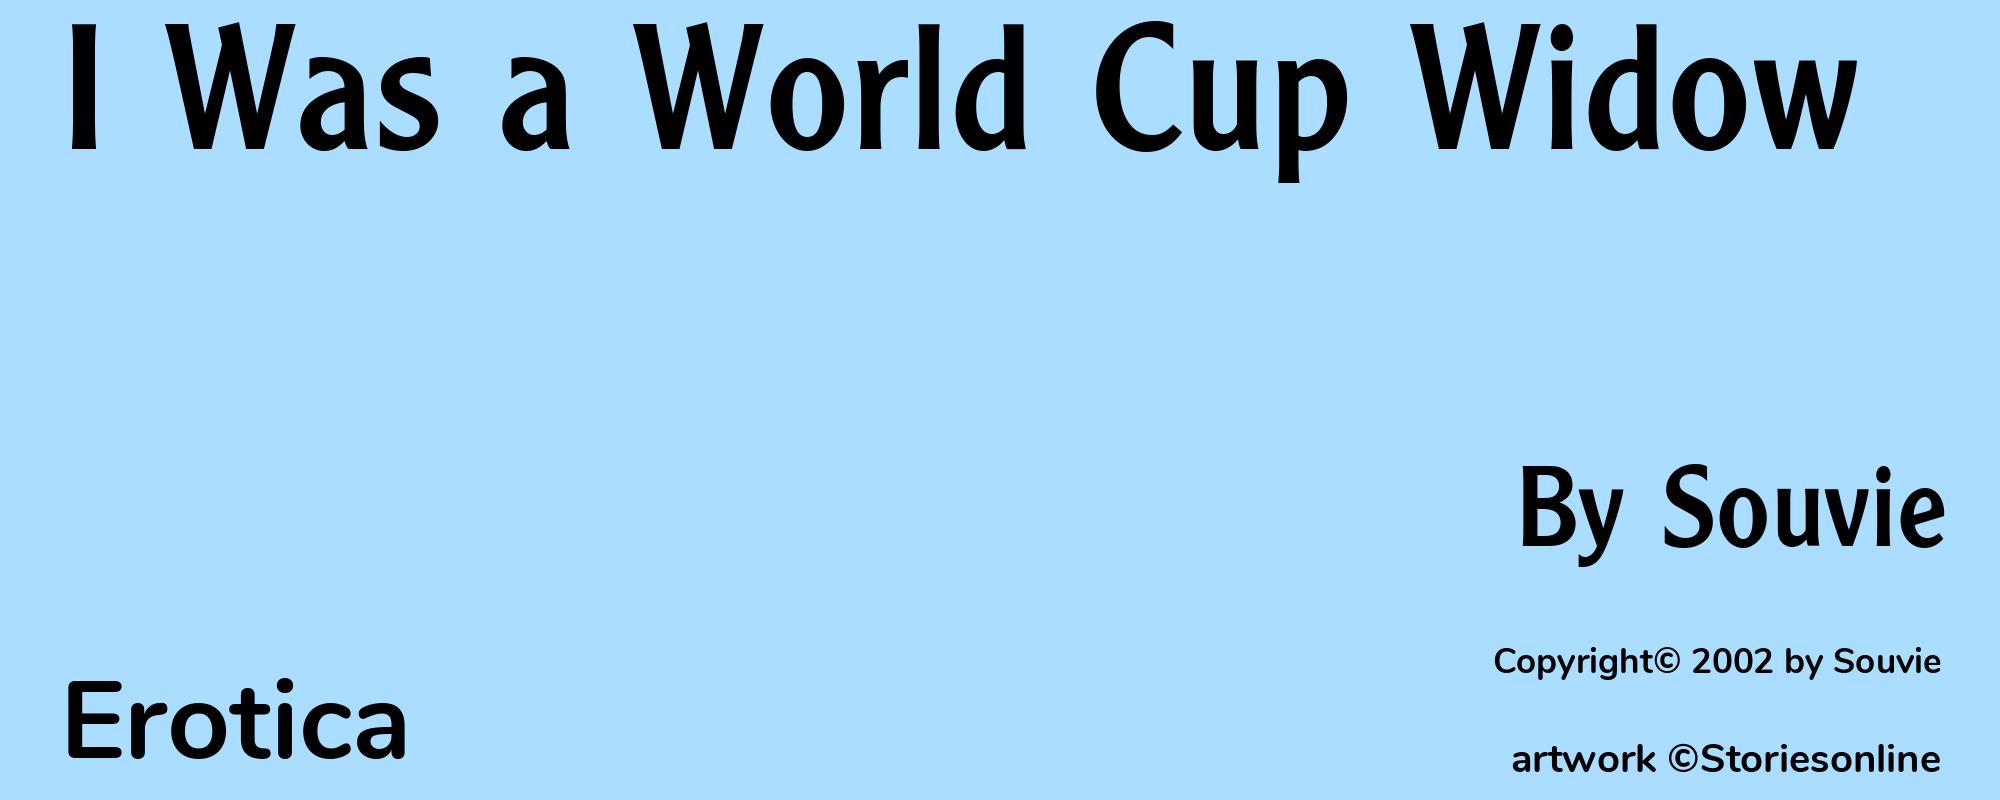 I Was a World Cup Widow - Cover